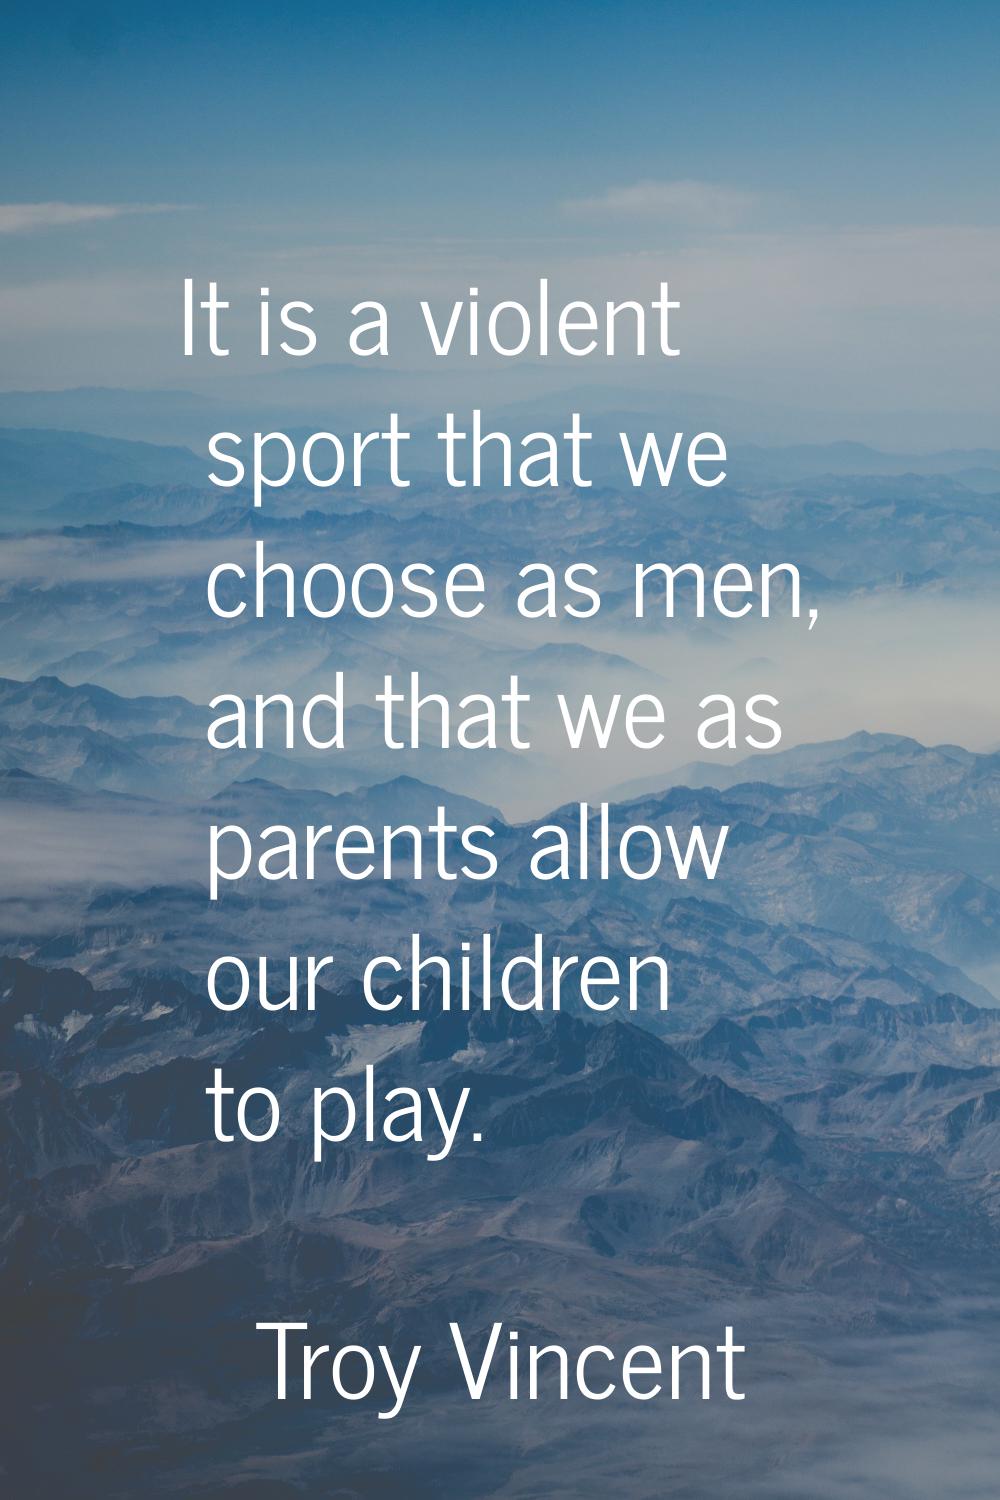 It is a violent sport that we choose as men, and that we as parents allow our children to play.